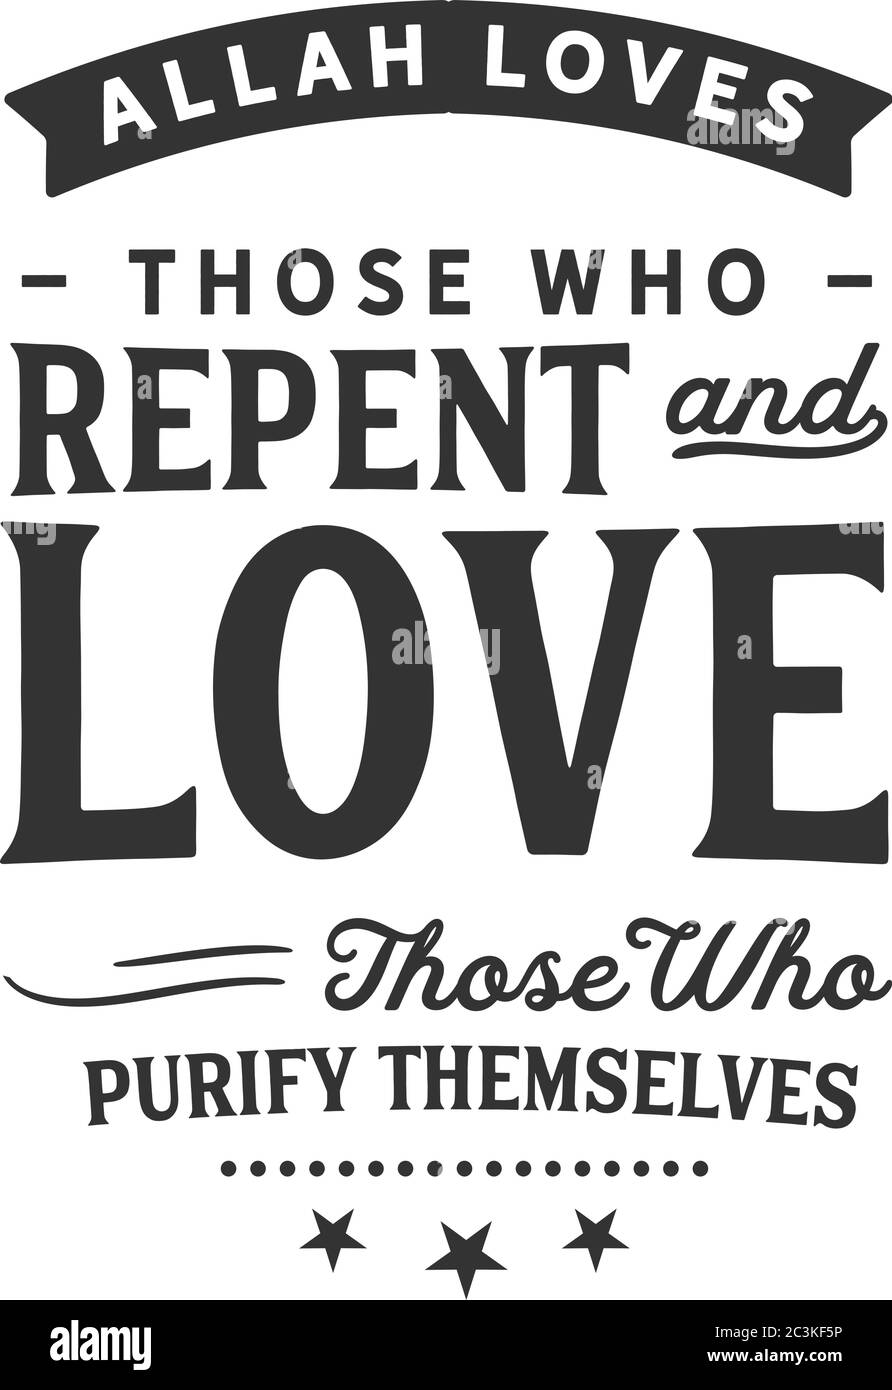 Allah loves those who repent and love those who purify themselves Stock Vector